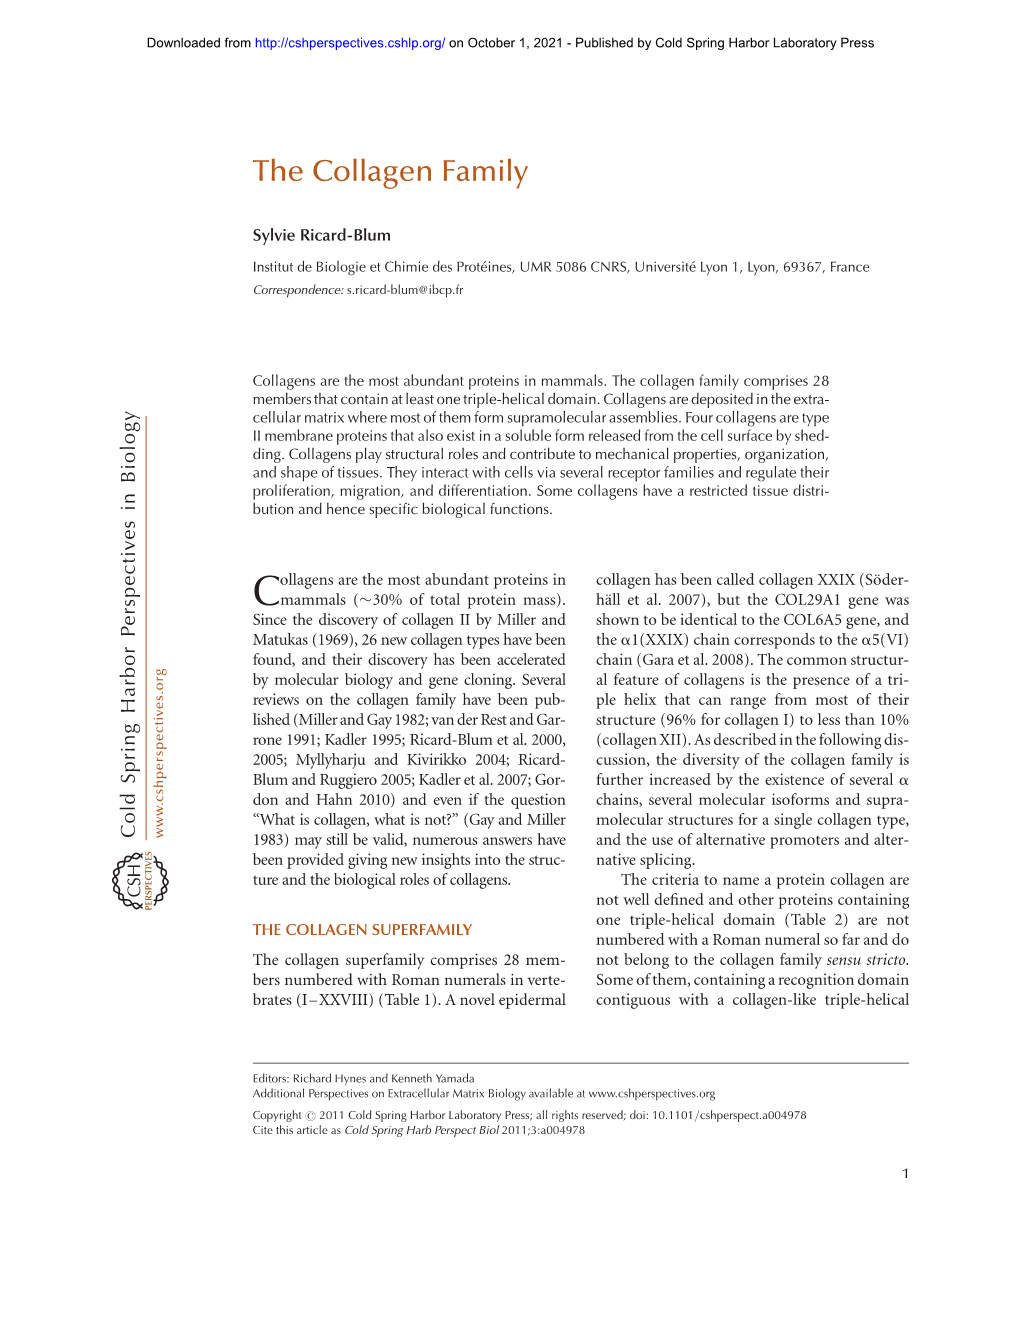 The Collagen Family